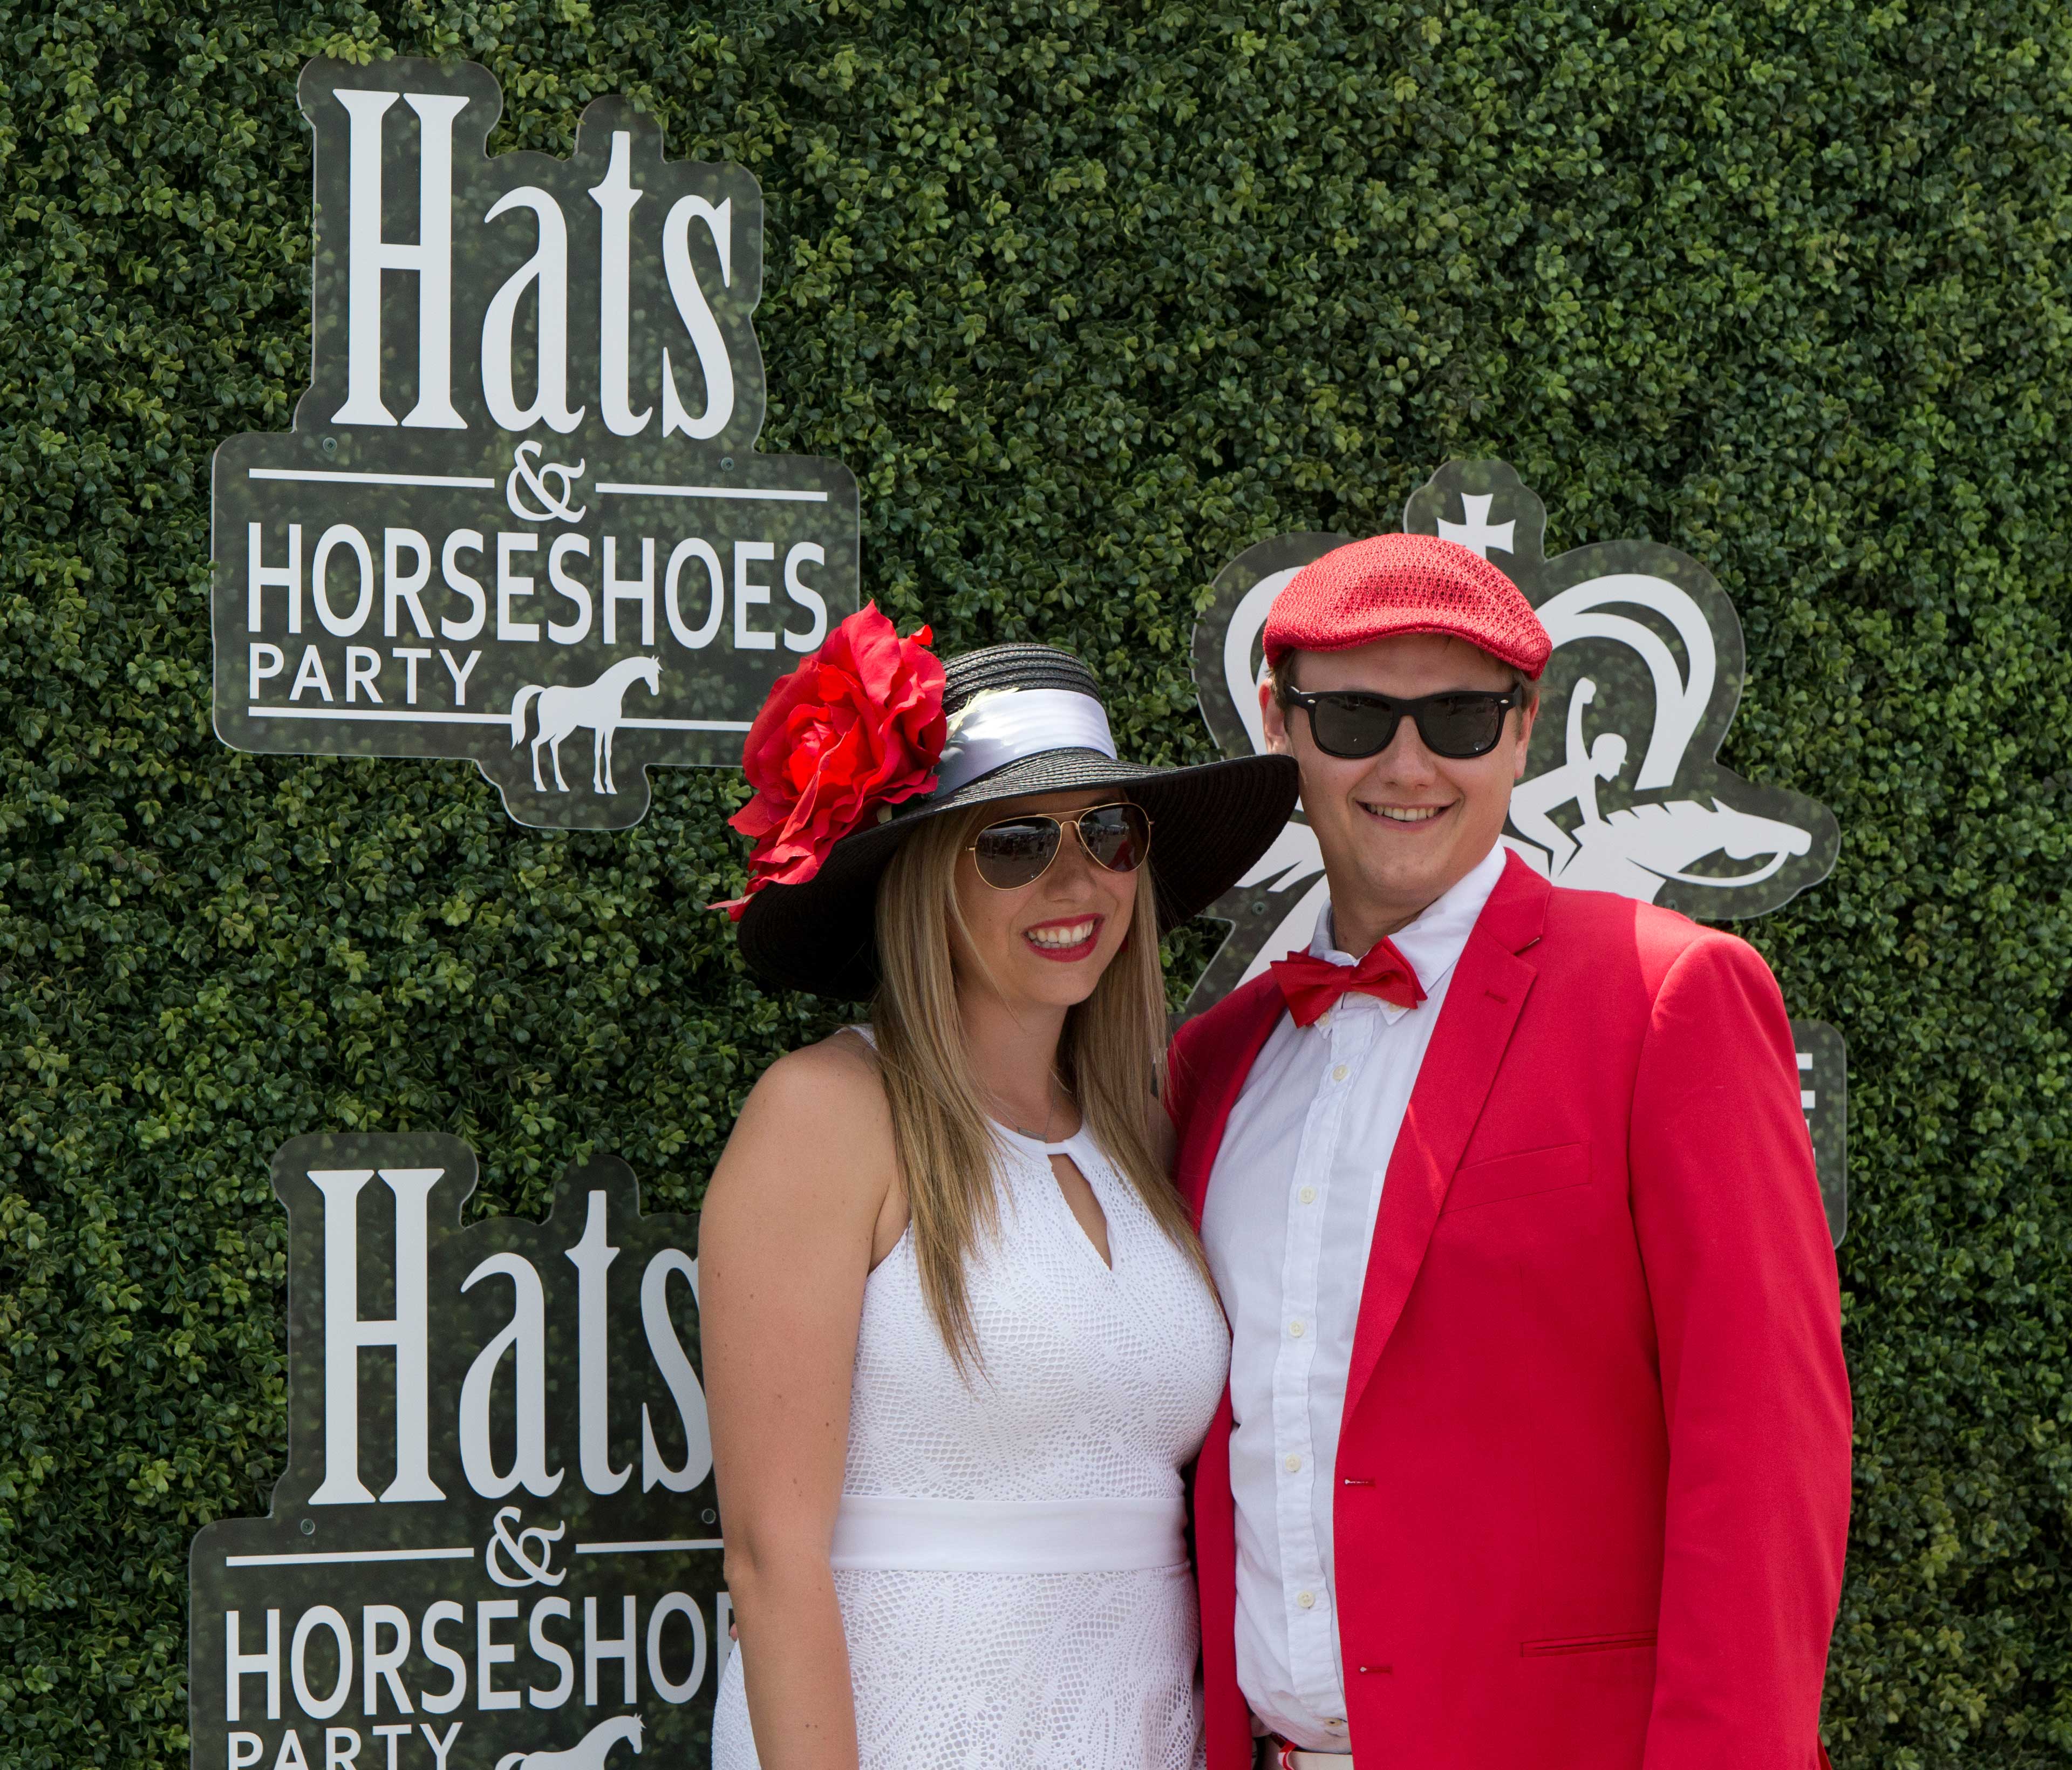 At the hats and horseshoes party at King's Plate